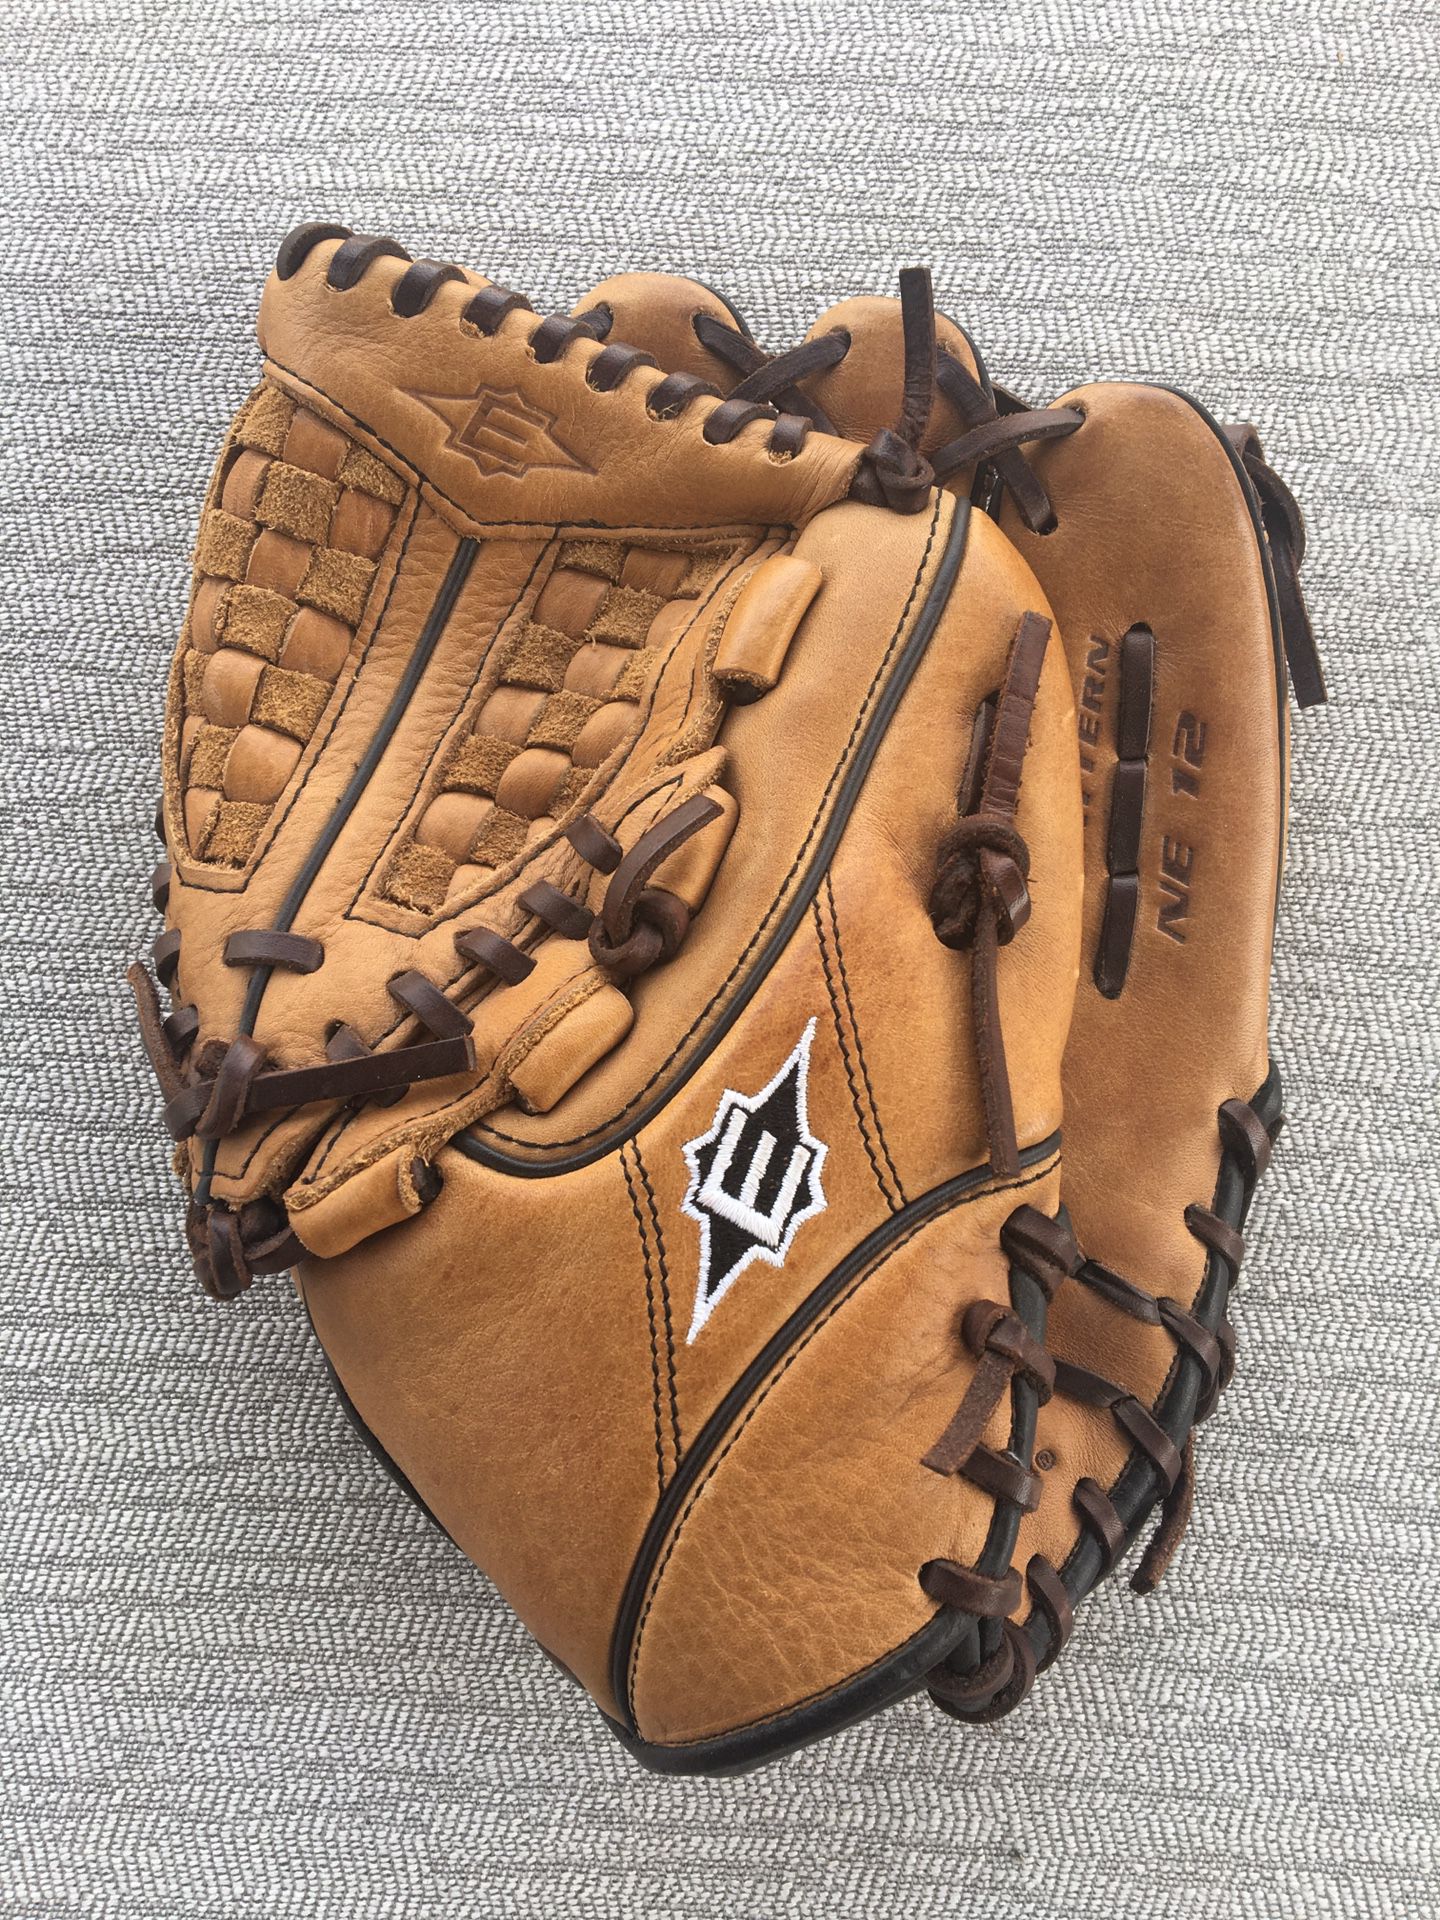 Easton 12” Baseball Glove In Like New Condition